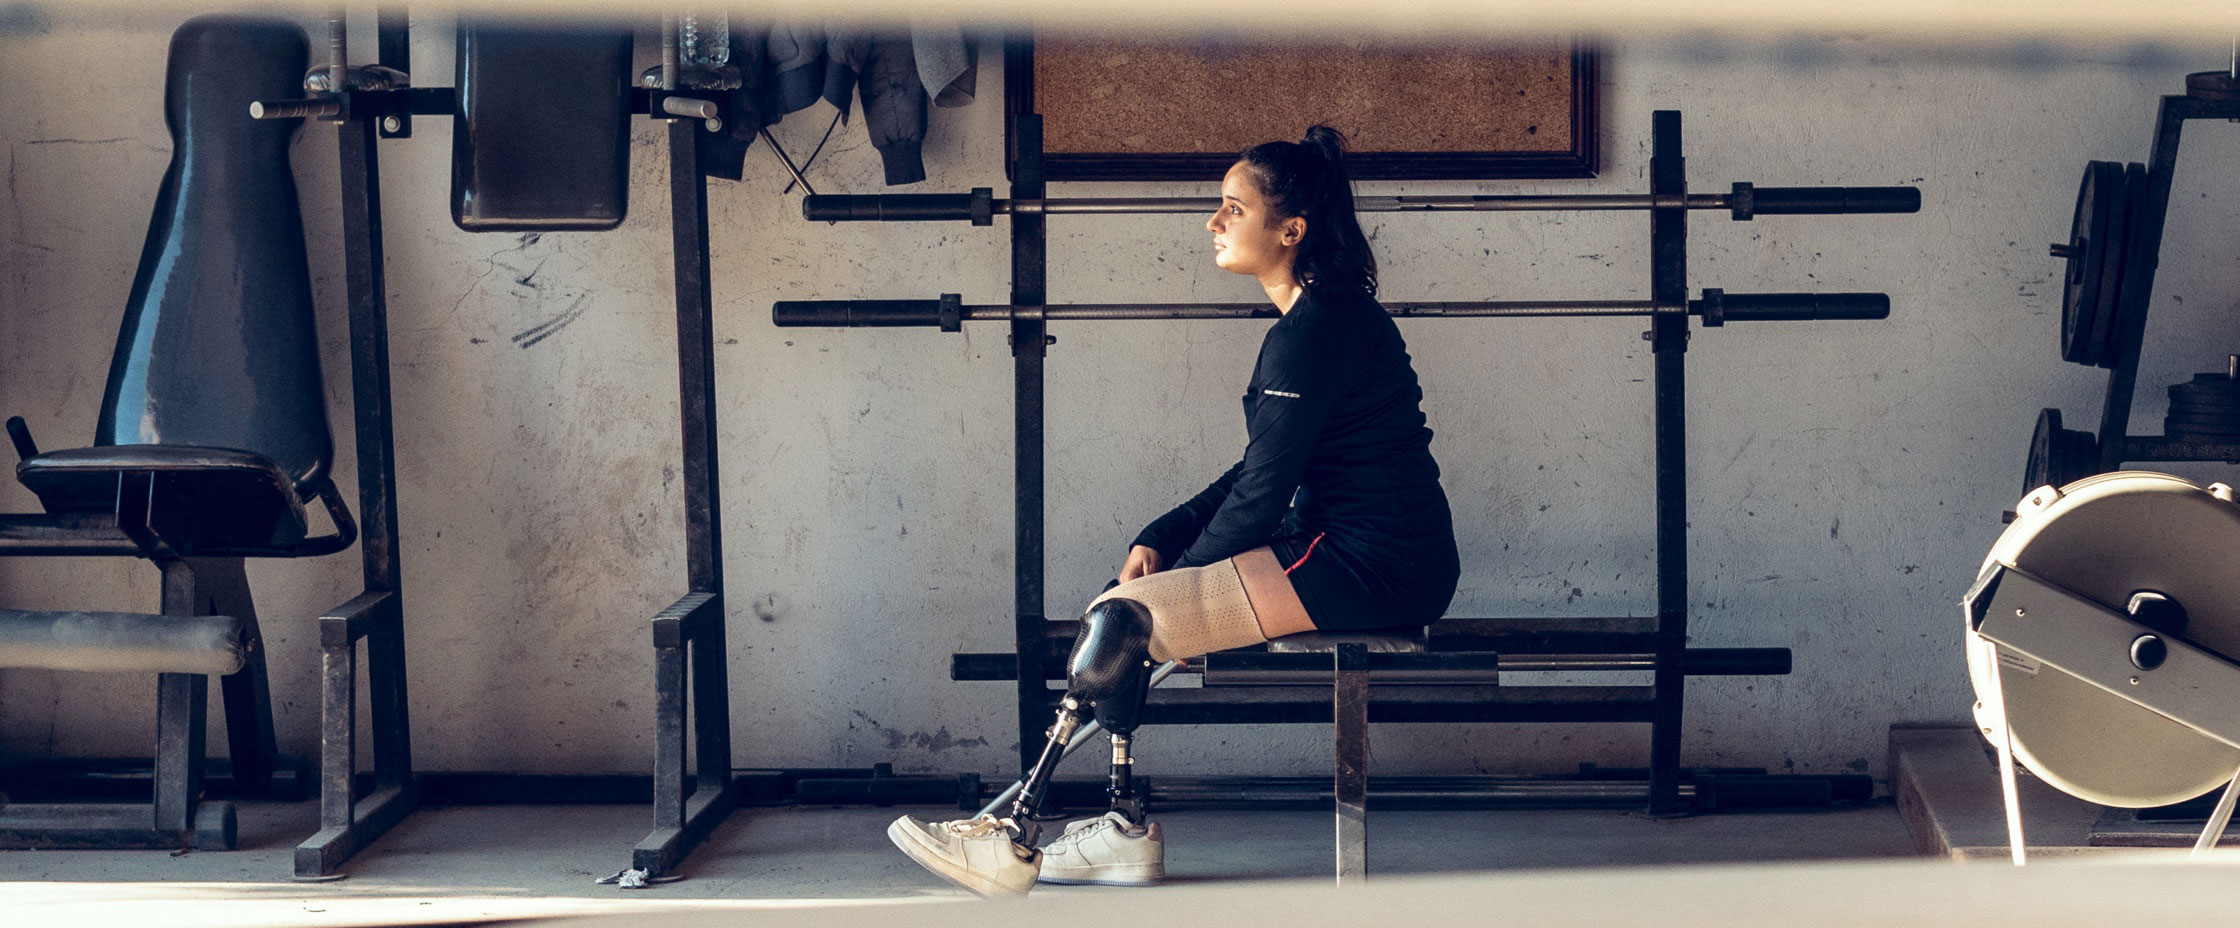 Athlete with prosthesis on leg sits in fitness room